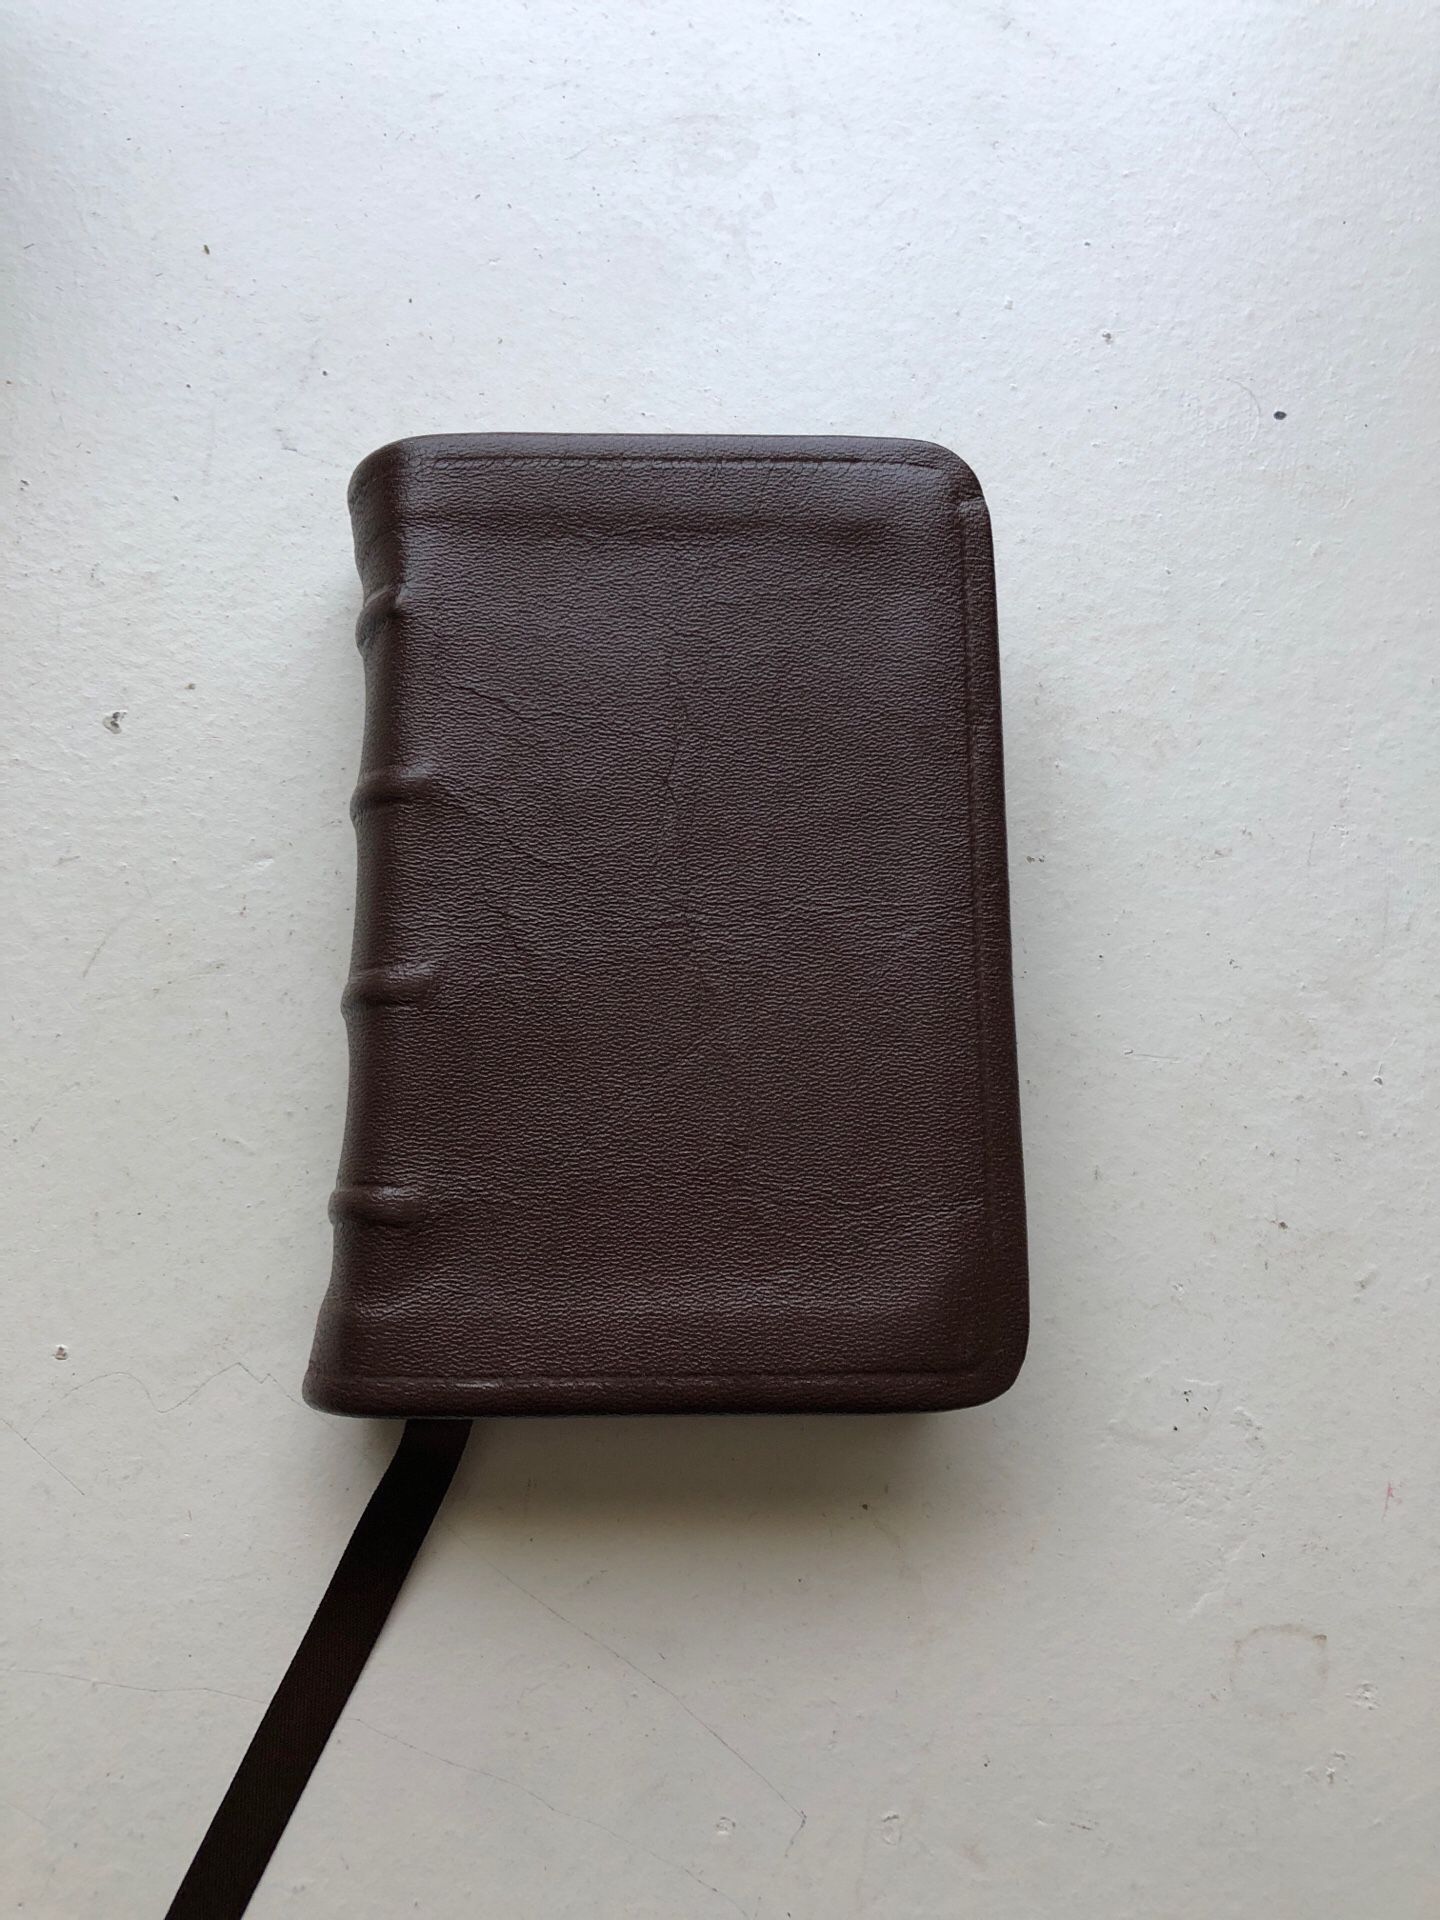 Handcrafted Compact Goatskin Leather Bible